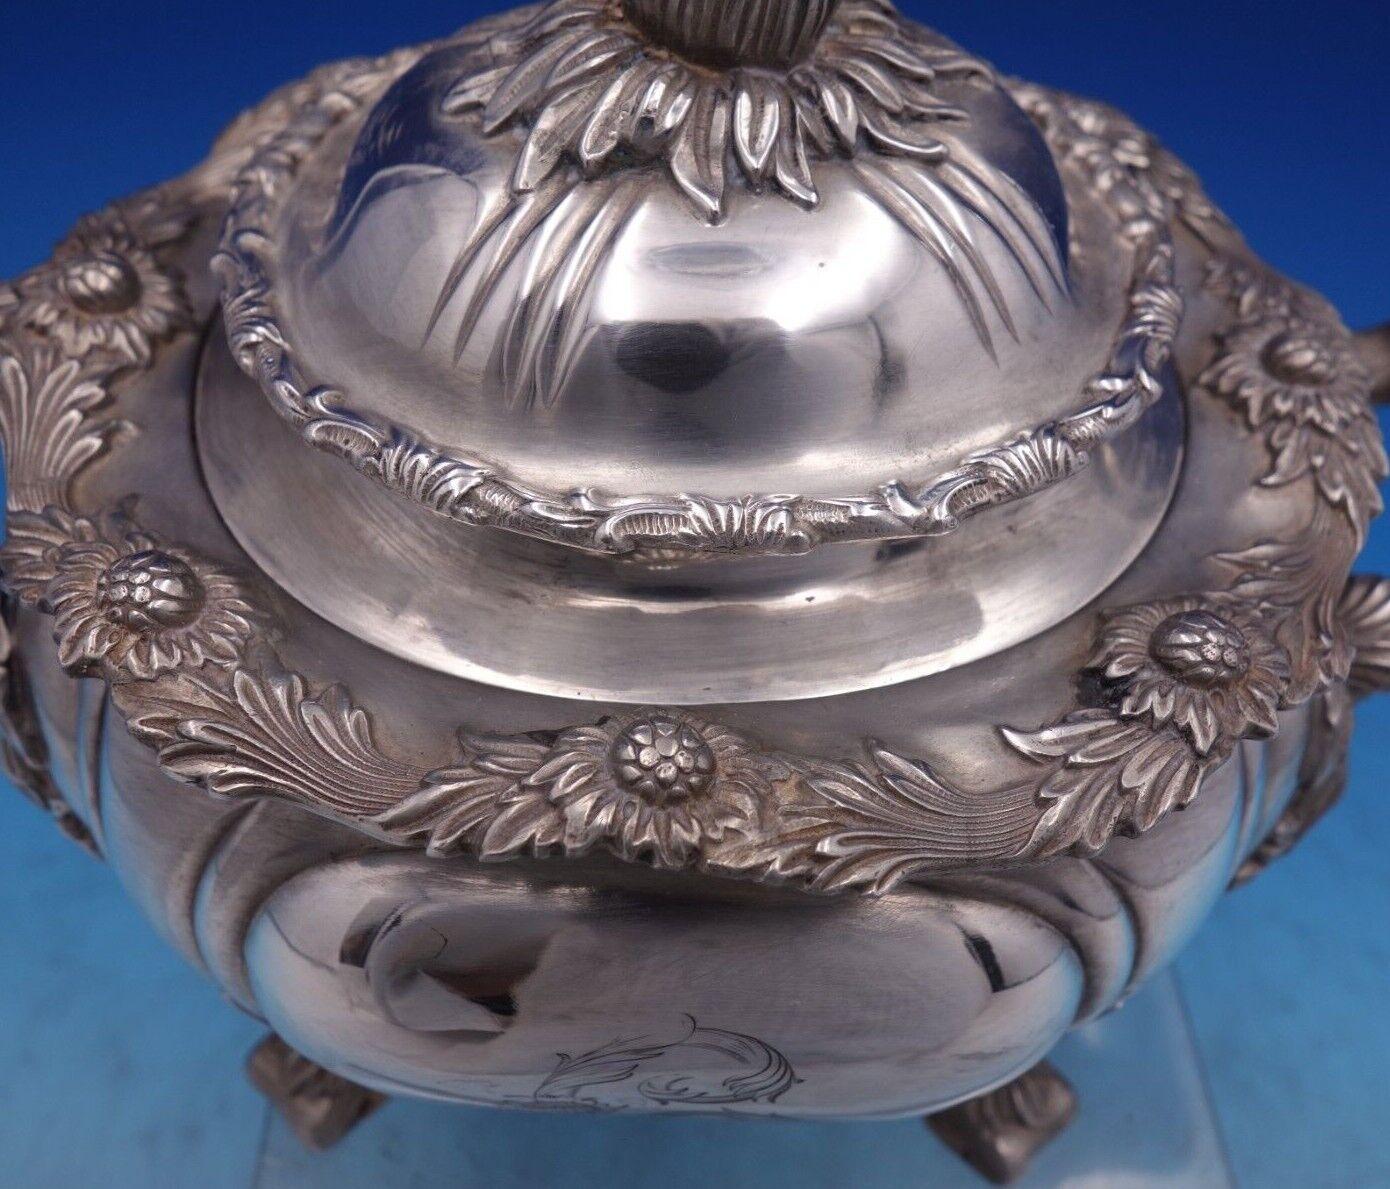 Chrysanthemum by Tiffany and Co Sterling Silver Sugar Bowl Footed Handles #7038 5